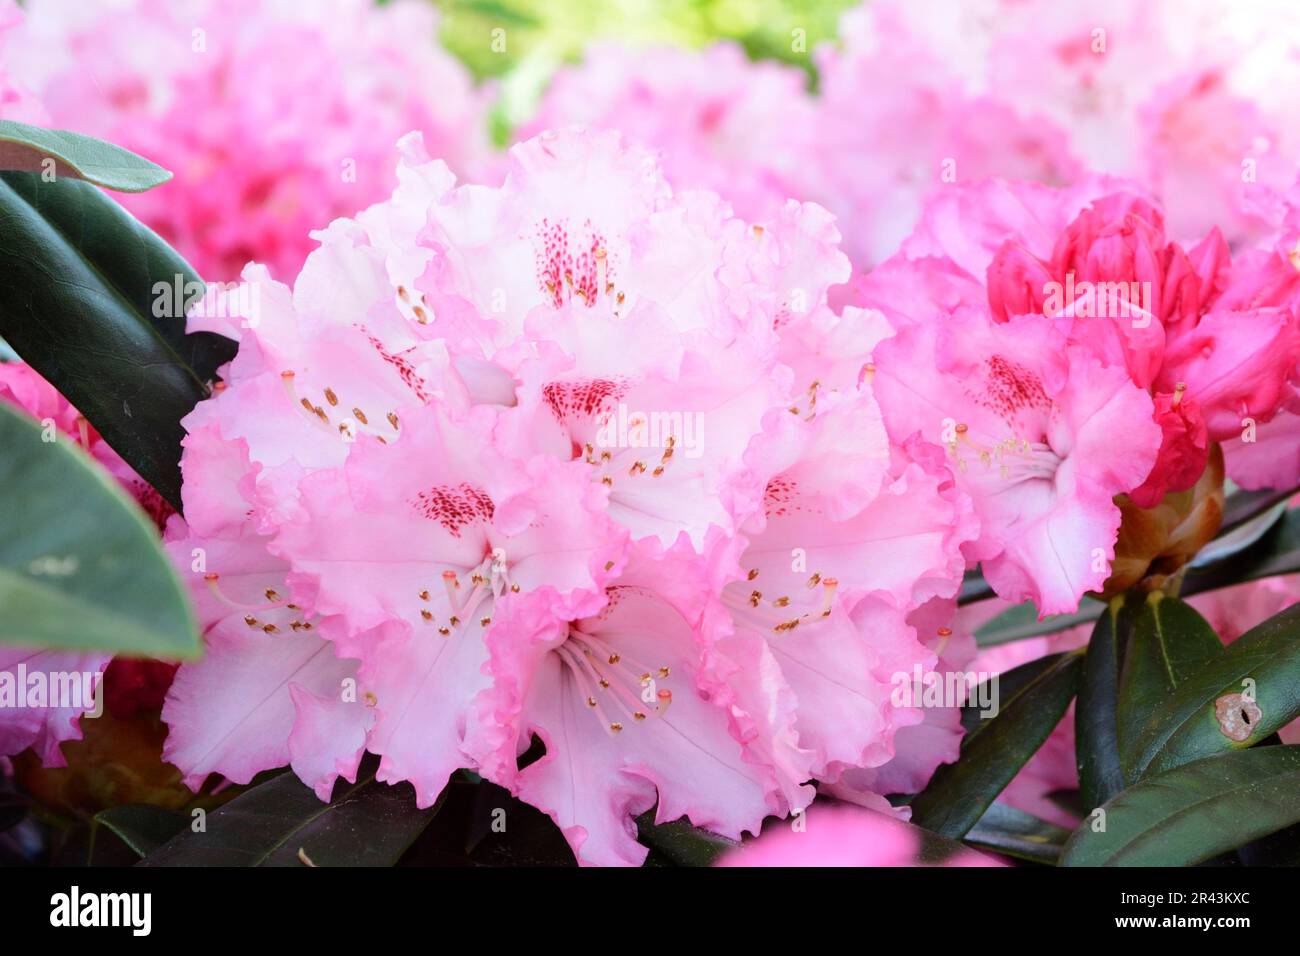 Pink blossoms of a rhododendron bush Stock Photo